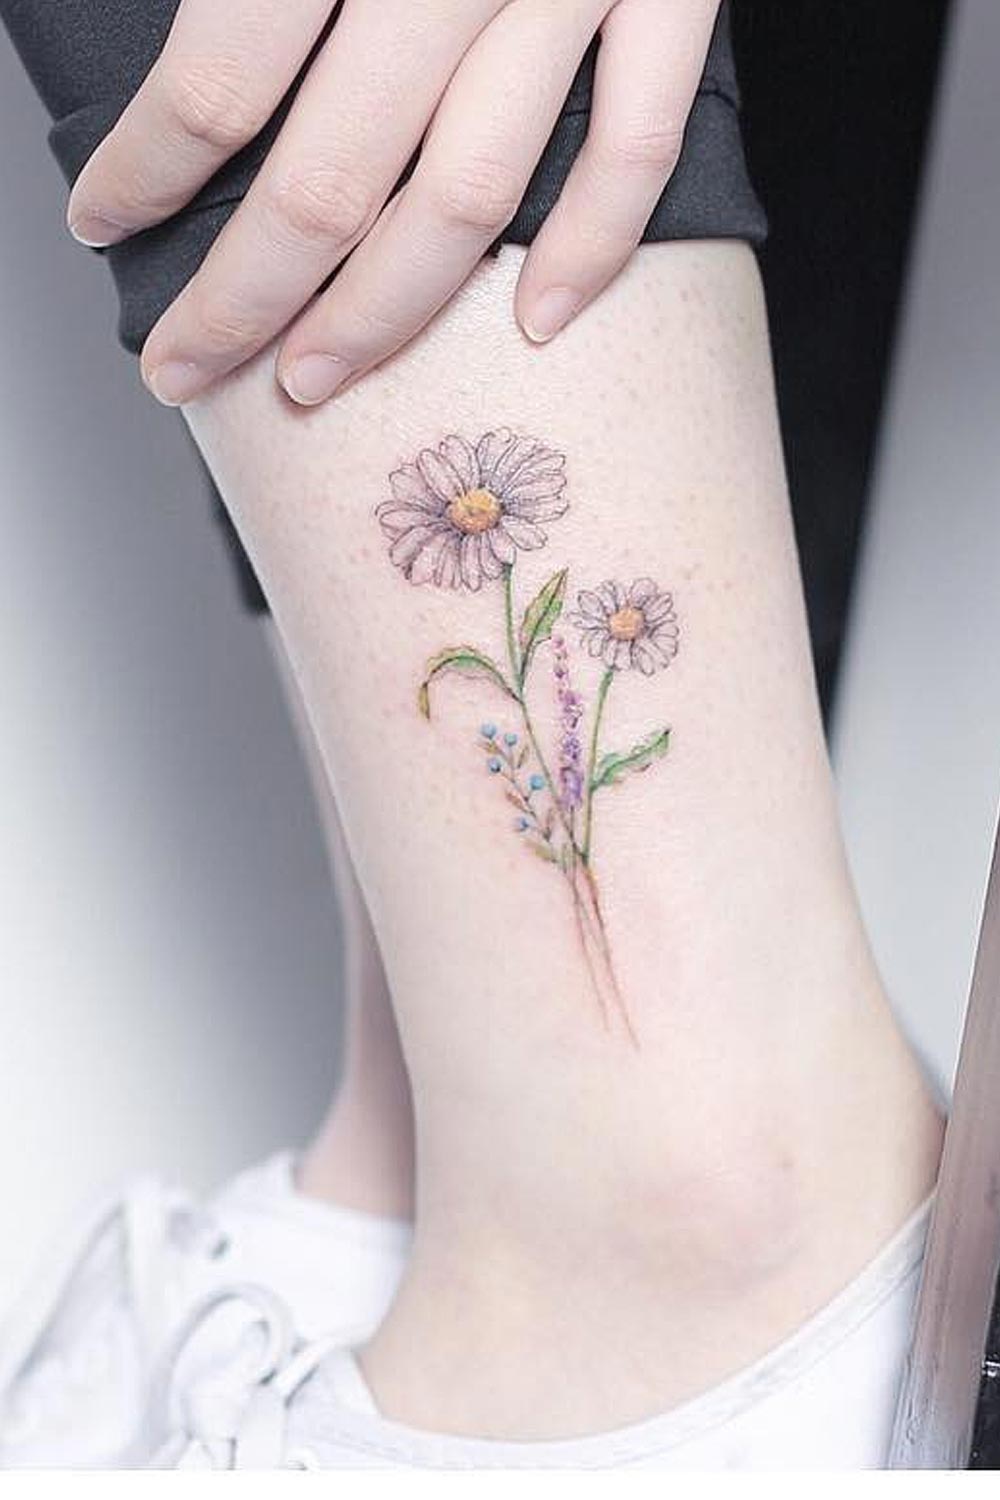 How to Choose The Perfect Design for Your Daisy Tattoo?